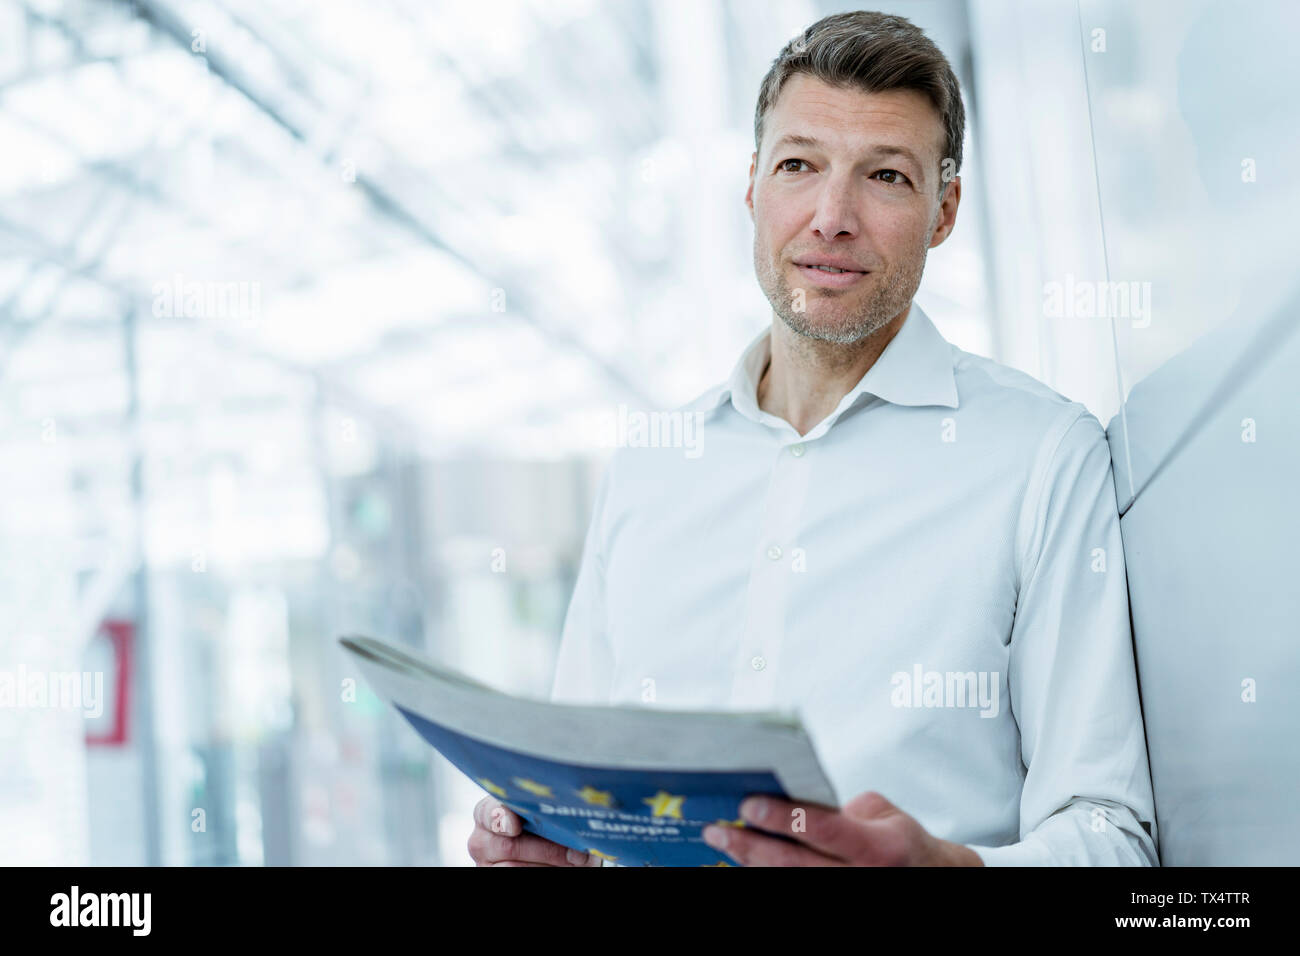 Businessman leaning against a wall reading newspaper Stock Photo